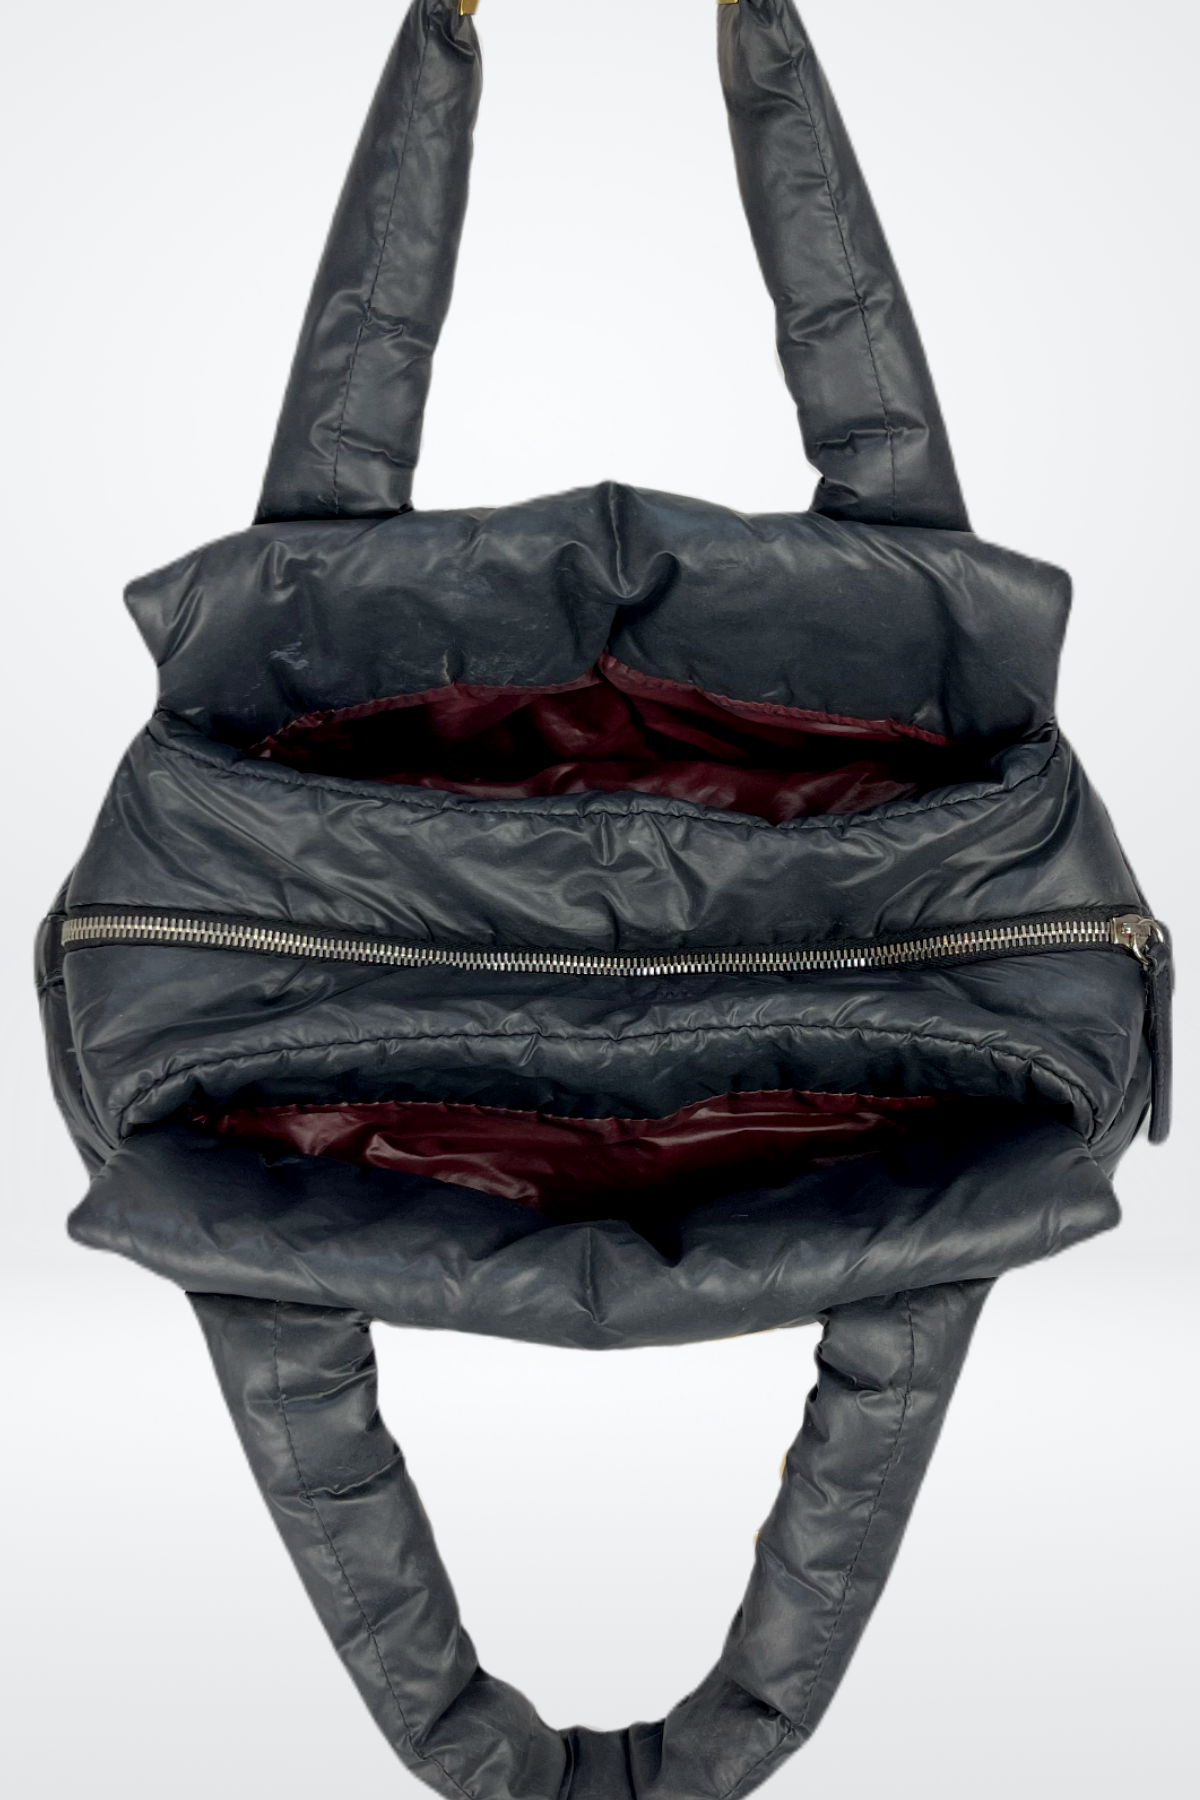 Chanel Quilted Nylon Puffer Bag  - Coco Cocoon Bowling Bag